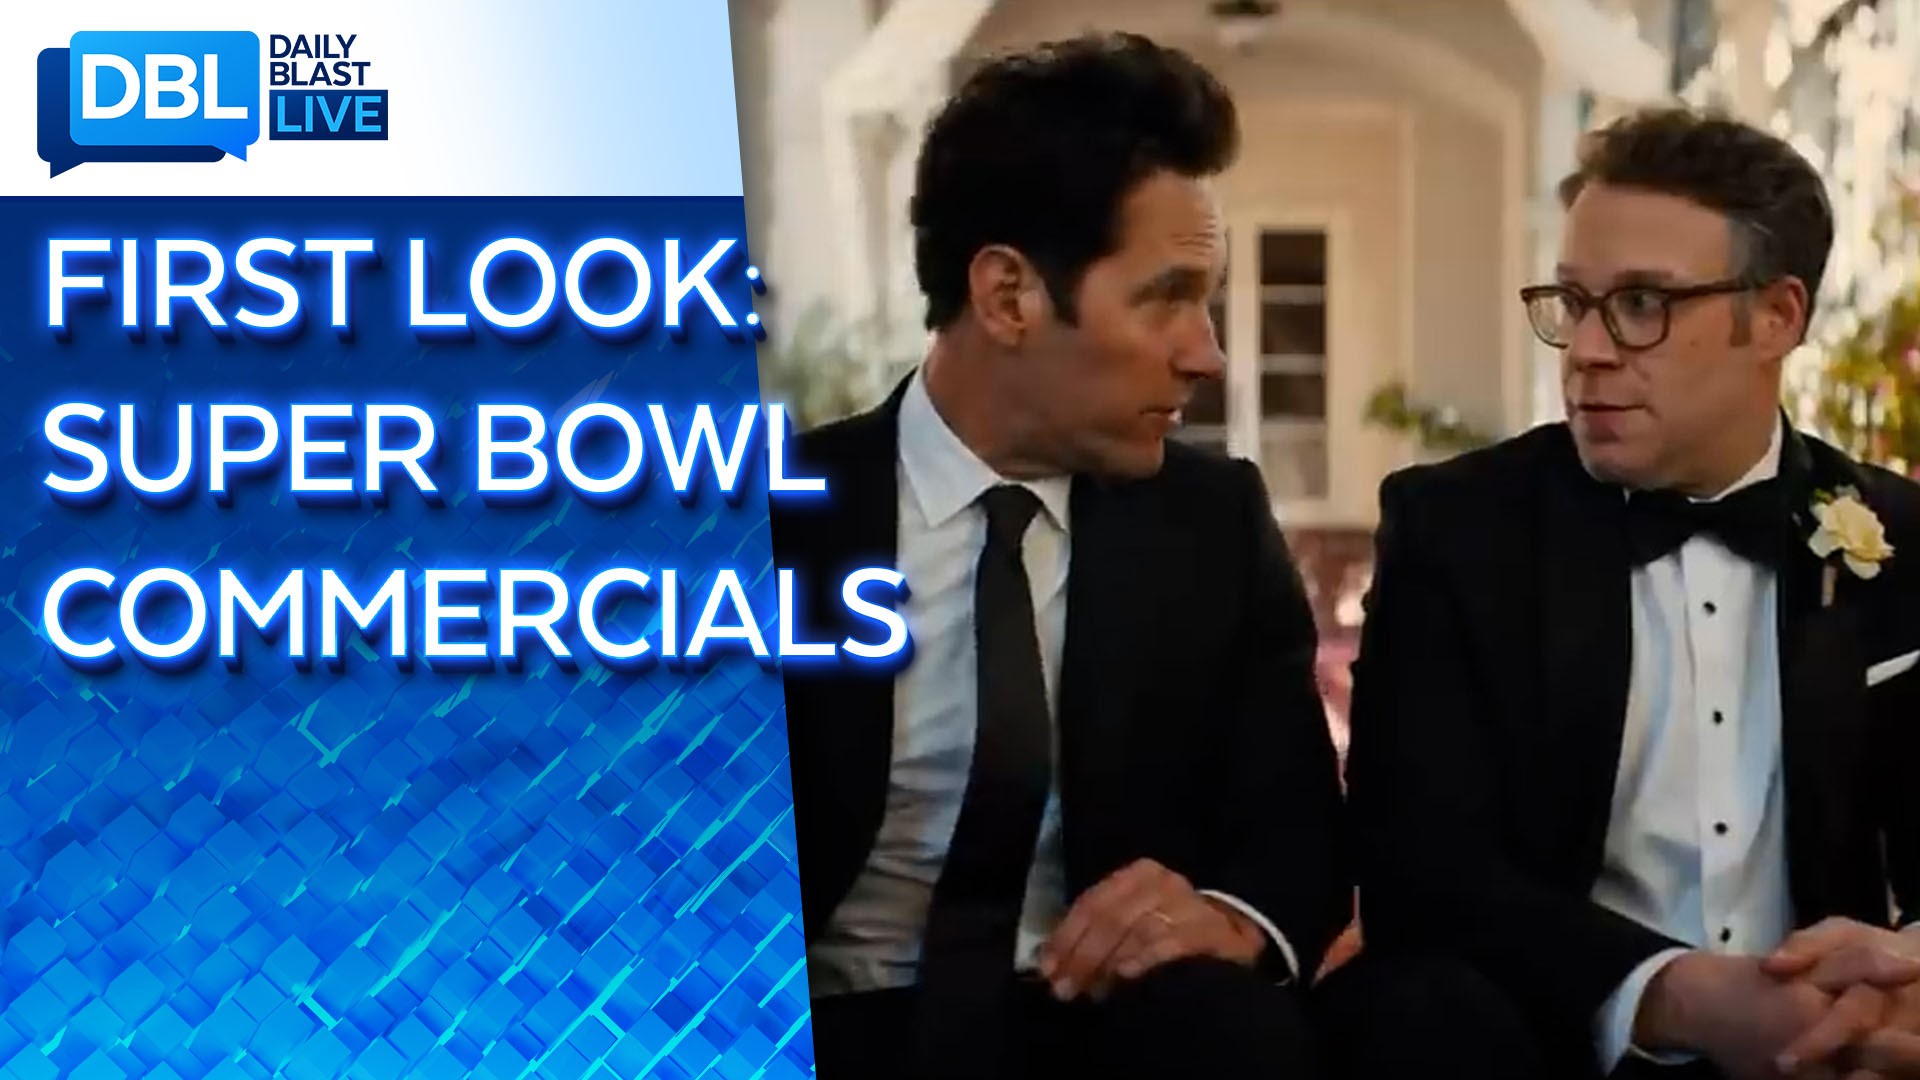 For those of you who like to watch the Big Game for the commercials, we've got a preview of some of the priciest teasers.